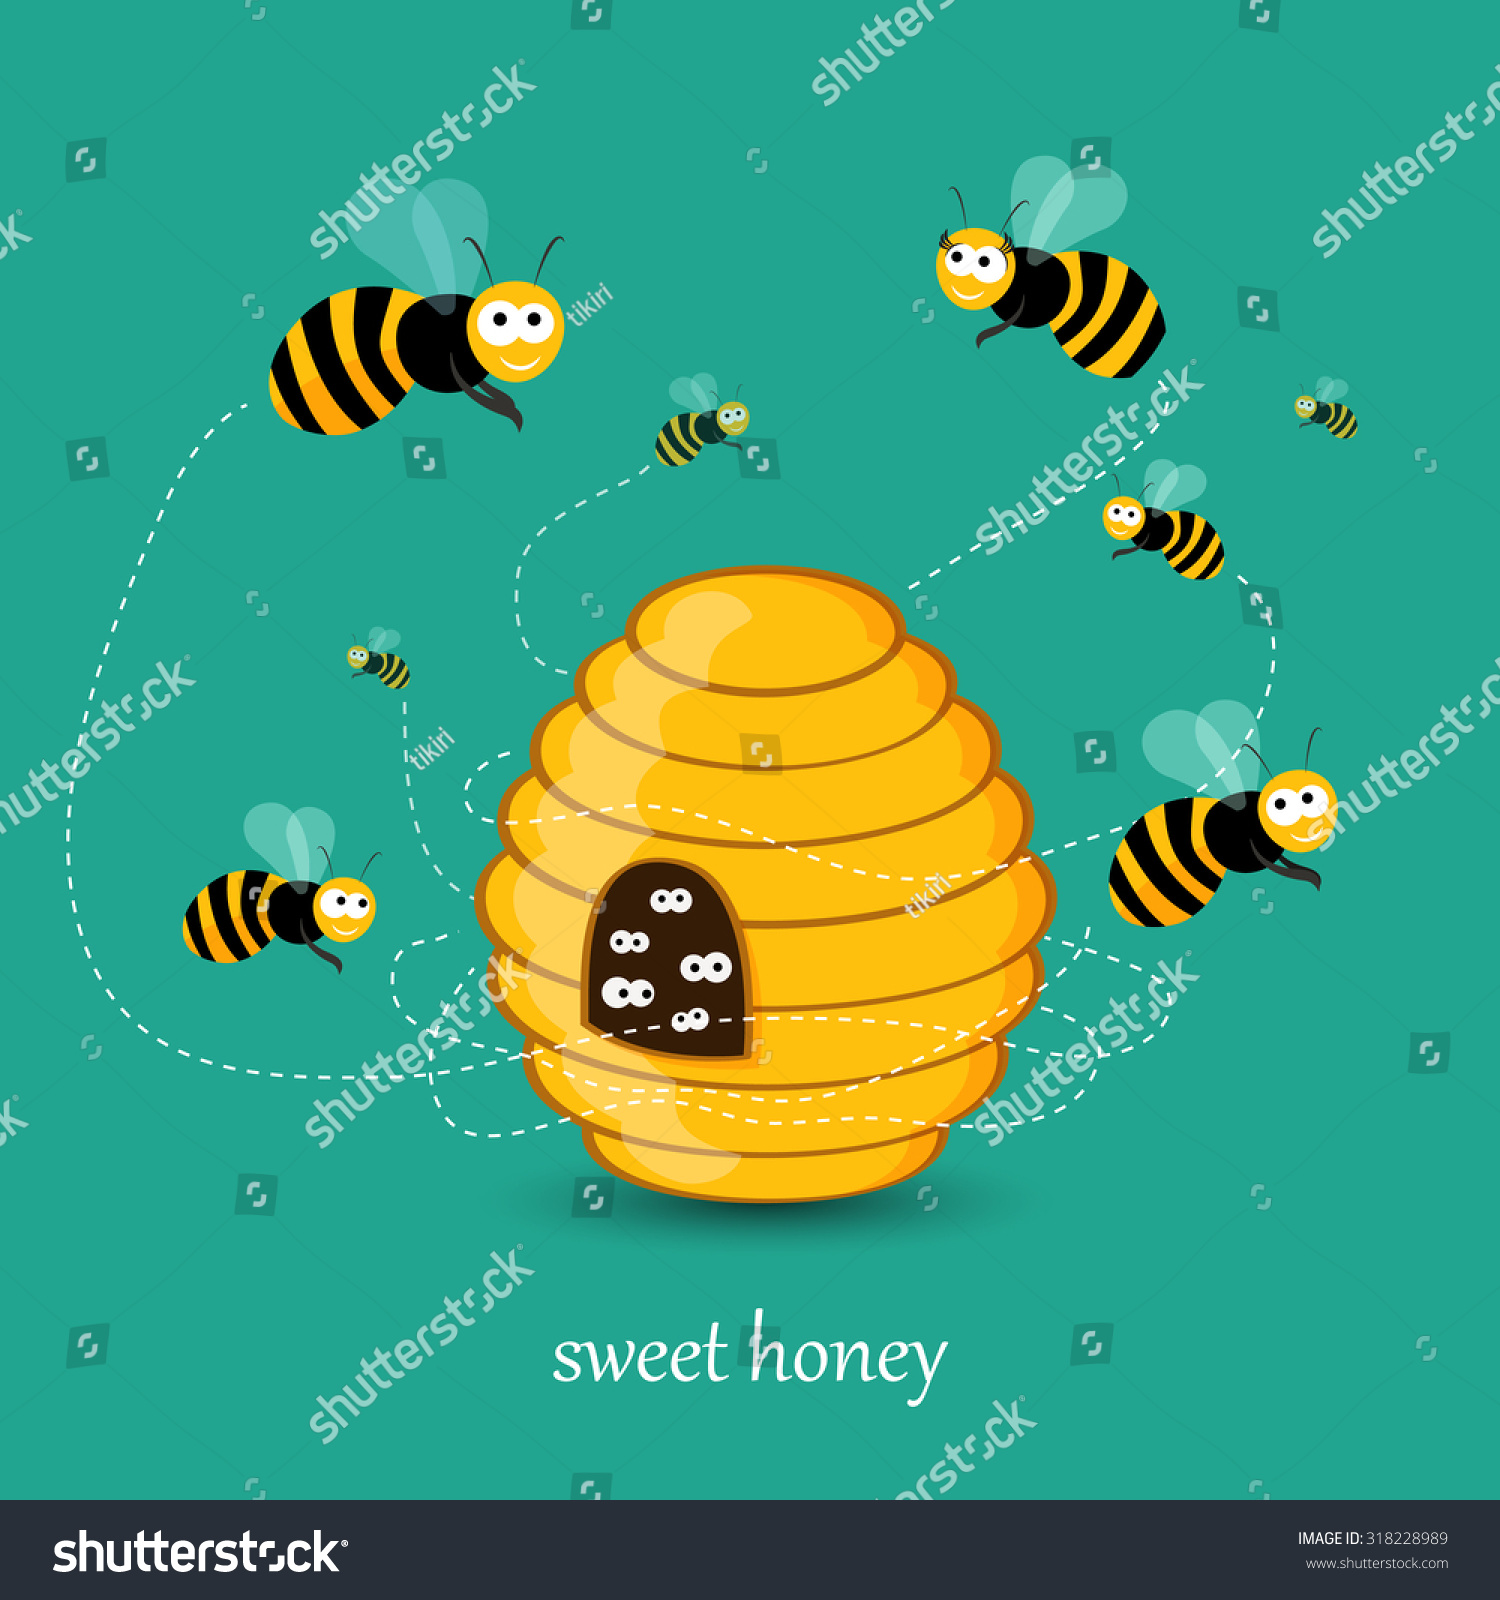 Cute Busy Bees Flying Around Bee Stock Vector Royalty Free Shutterstock